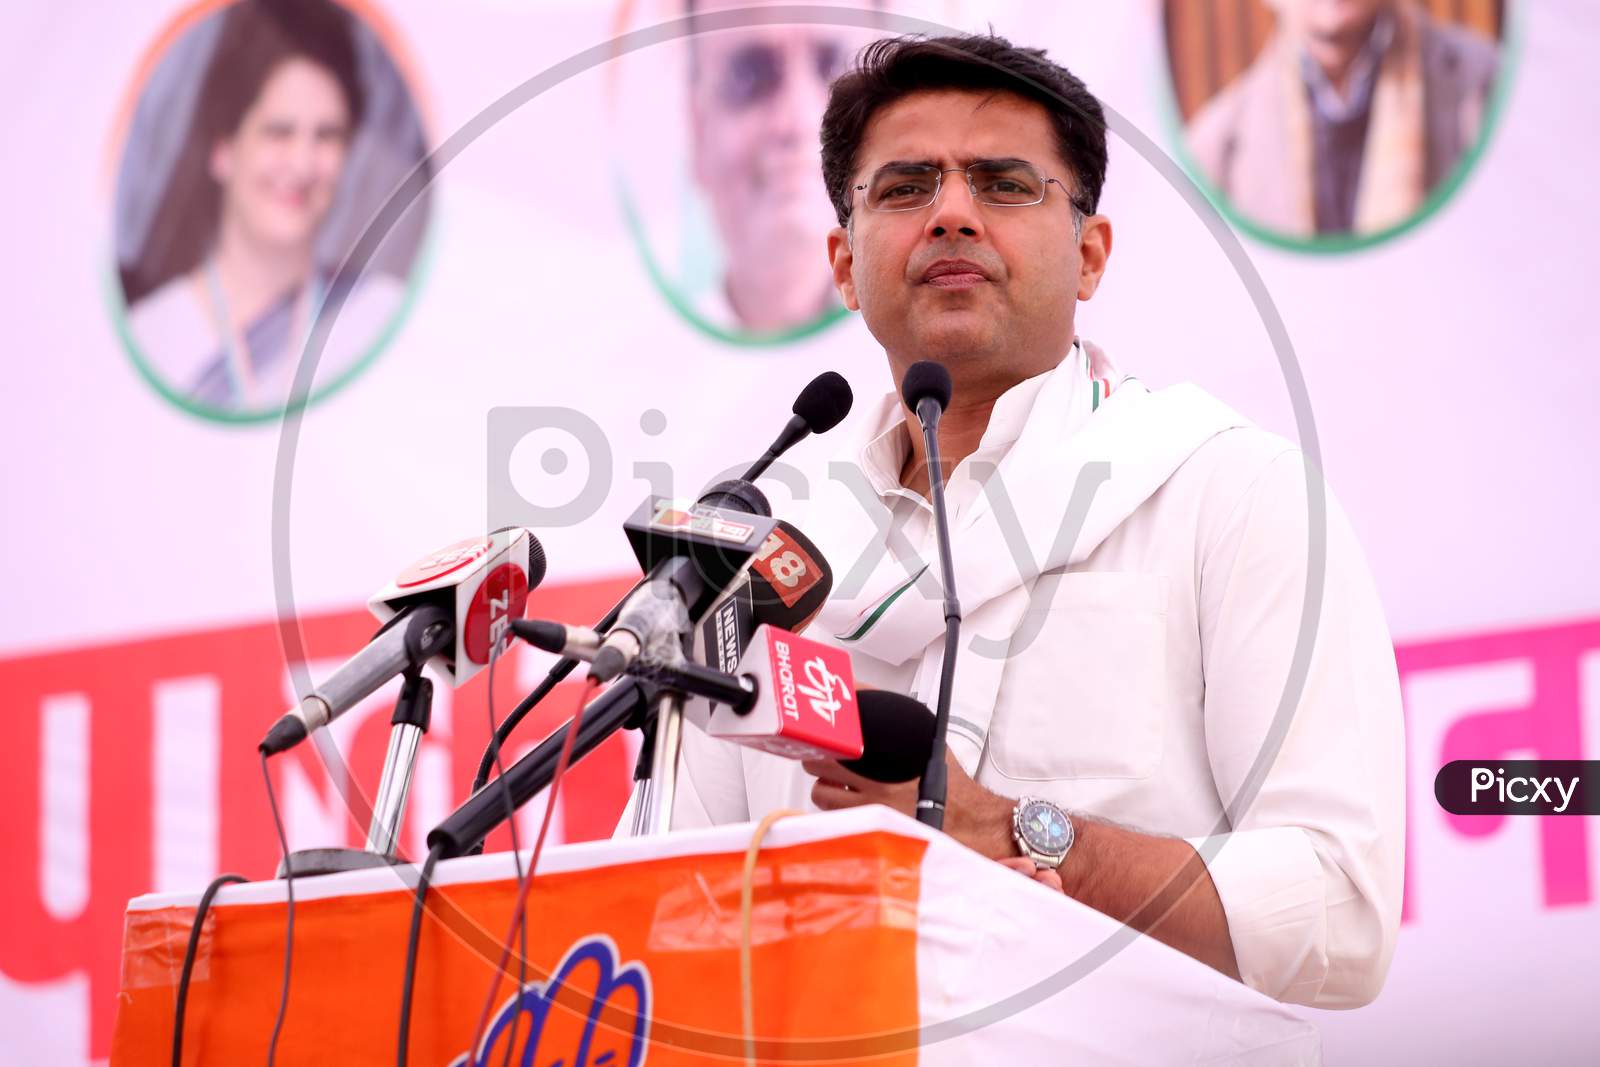 Rajasthan Deputy Chief Minister & State Congress President Sachin Pilot participate in a campaign rally ahead of Lok Sabha Elections in 2019, Pushkar, Rajasthan